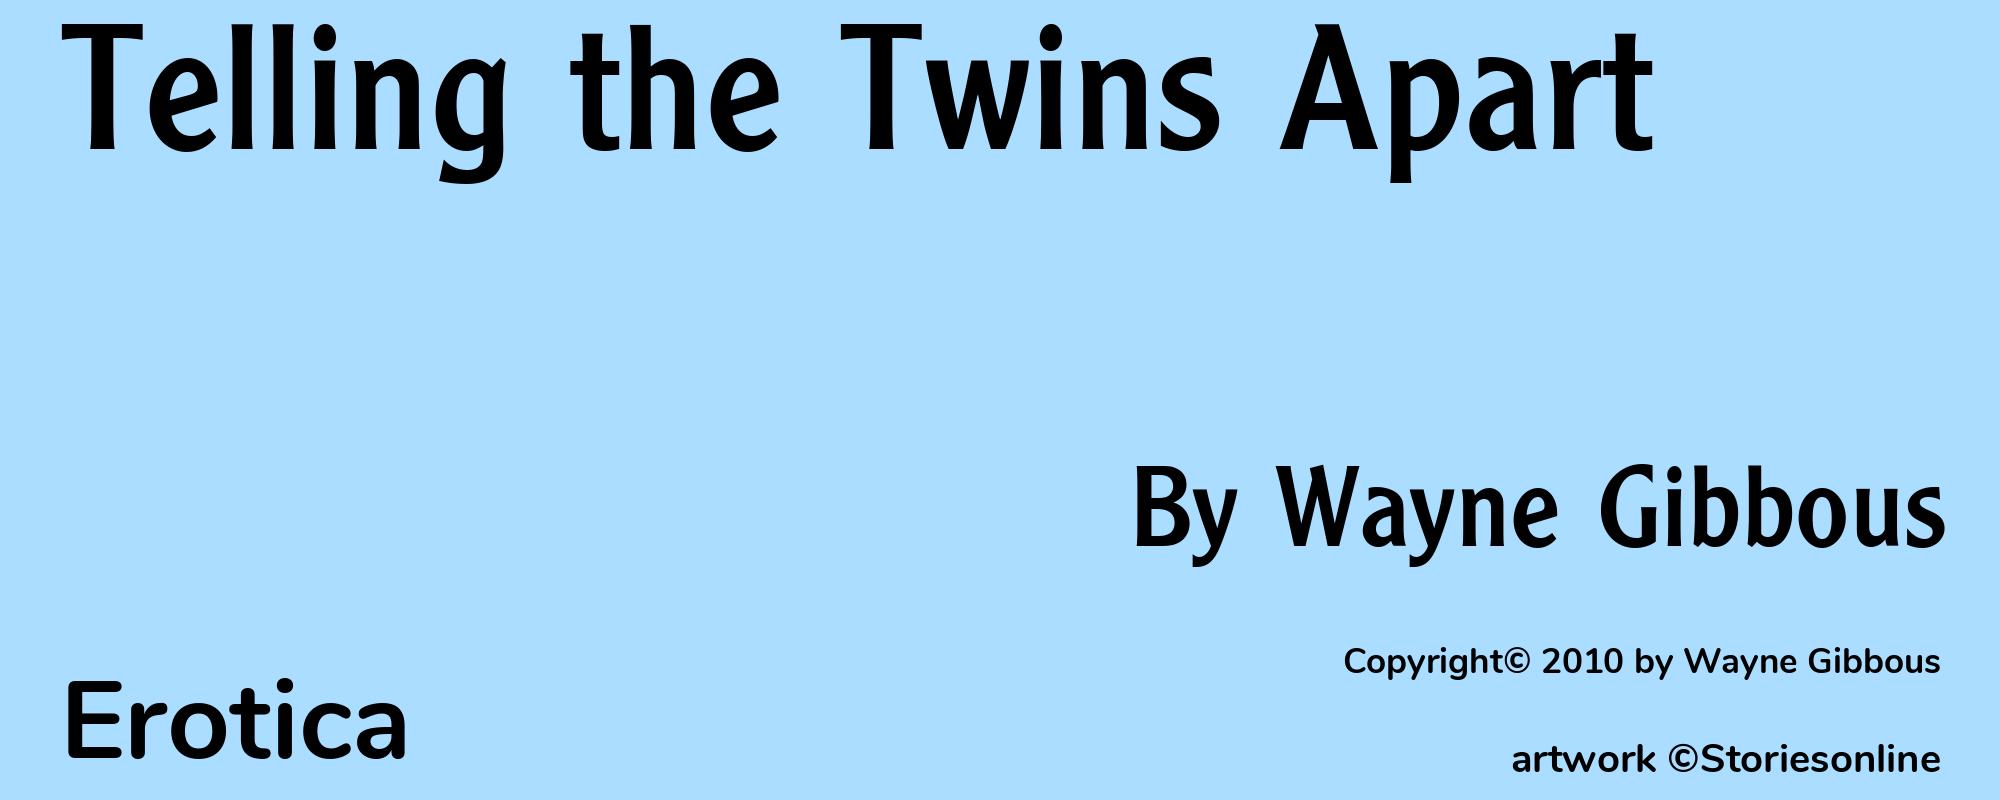 Telling the Twins Apart - Cover